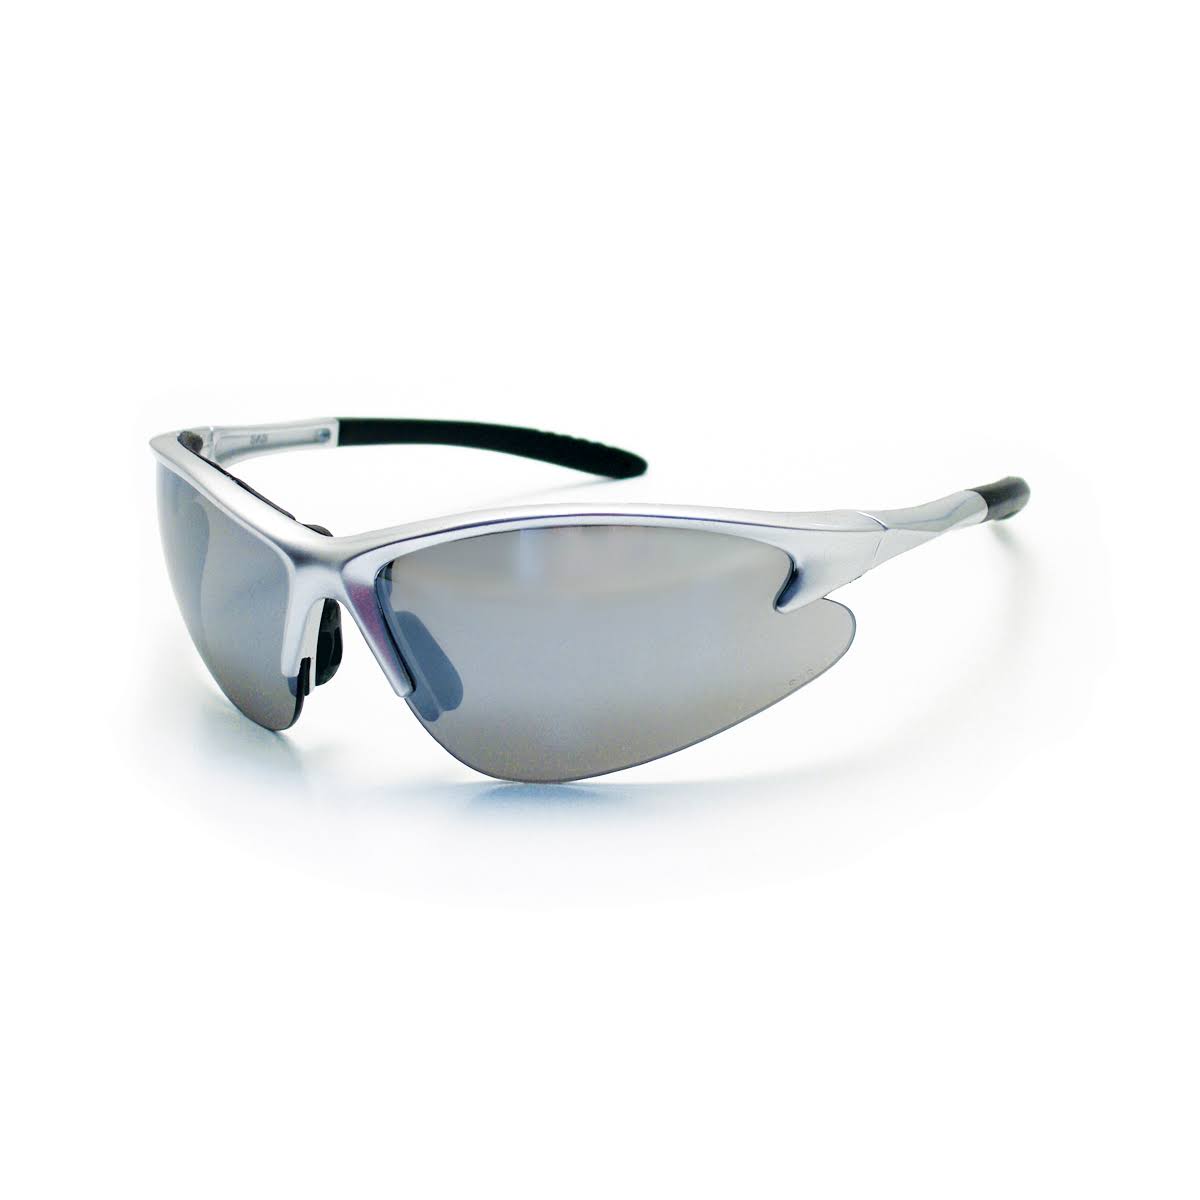 SAS 540-0503 DB2 Safety Glasses, Silver with Mirror Lens